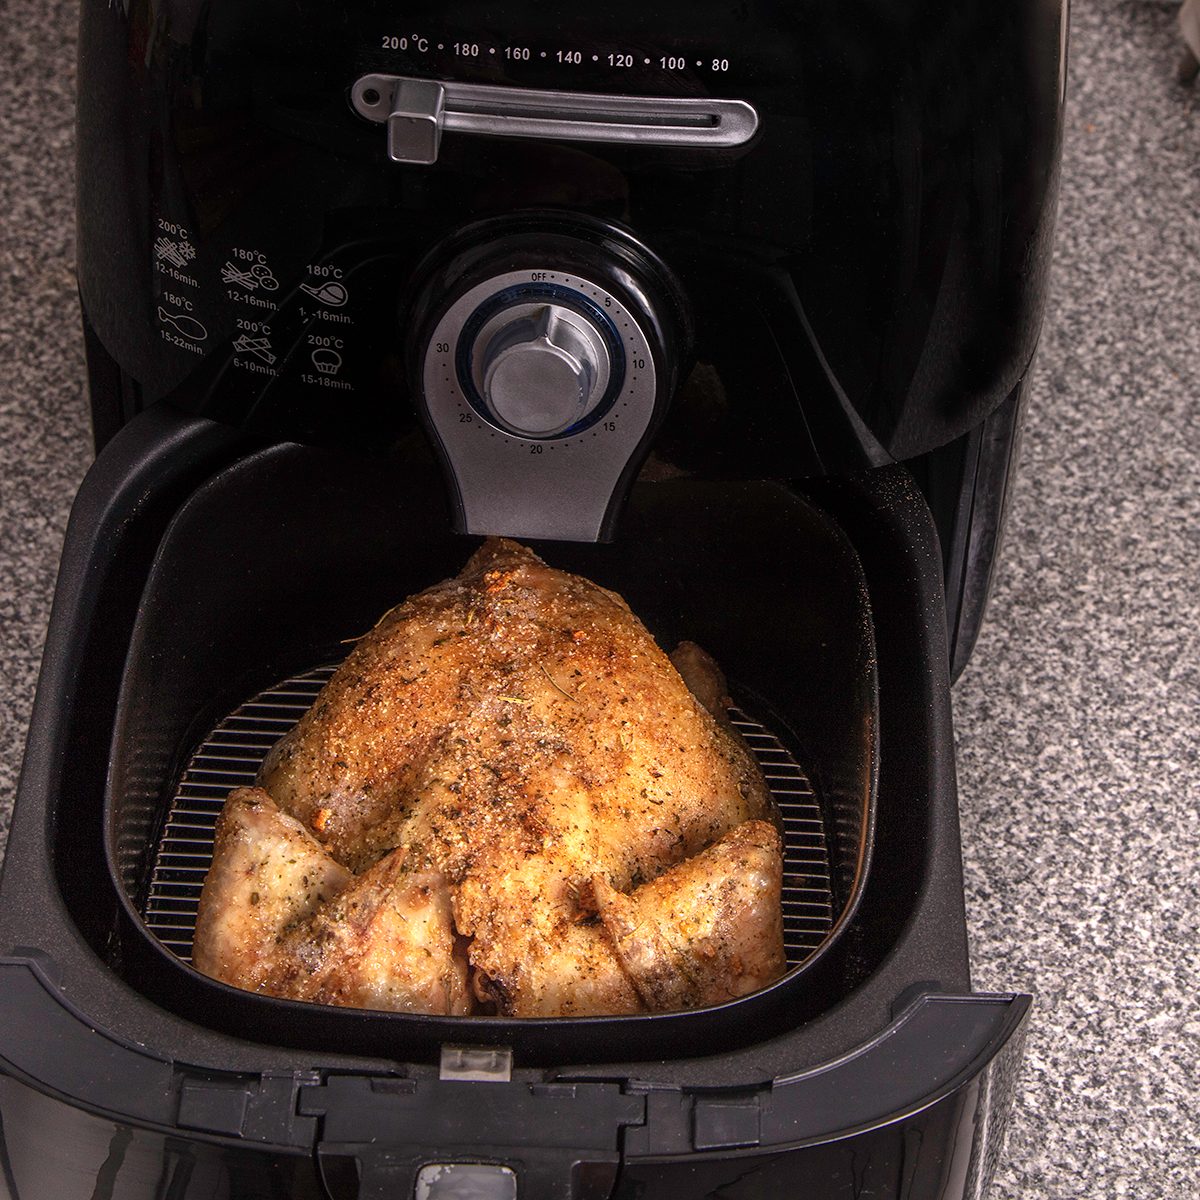 Roasted turkey in the hot air fryer / oven in the kitchen seen from above.